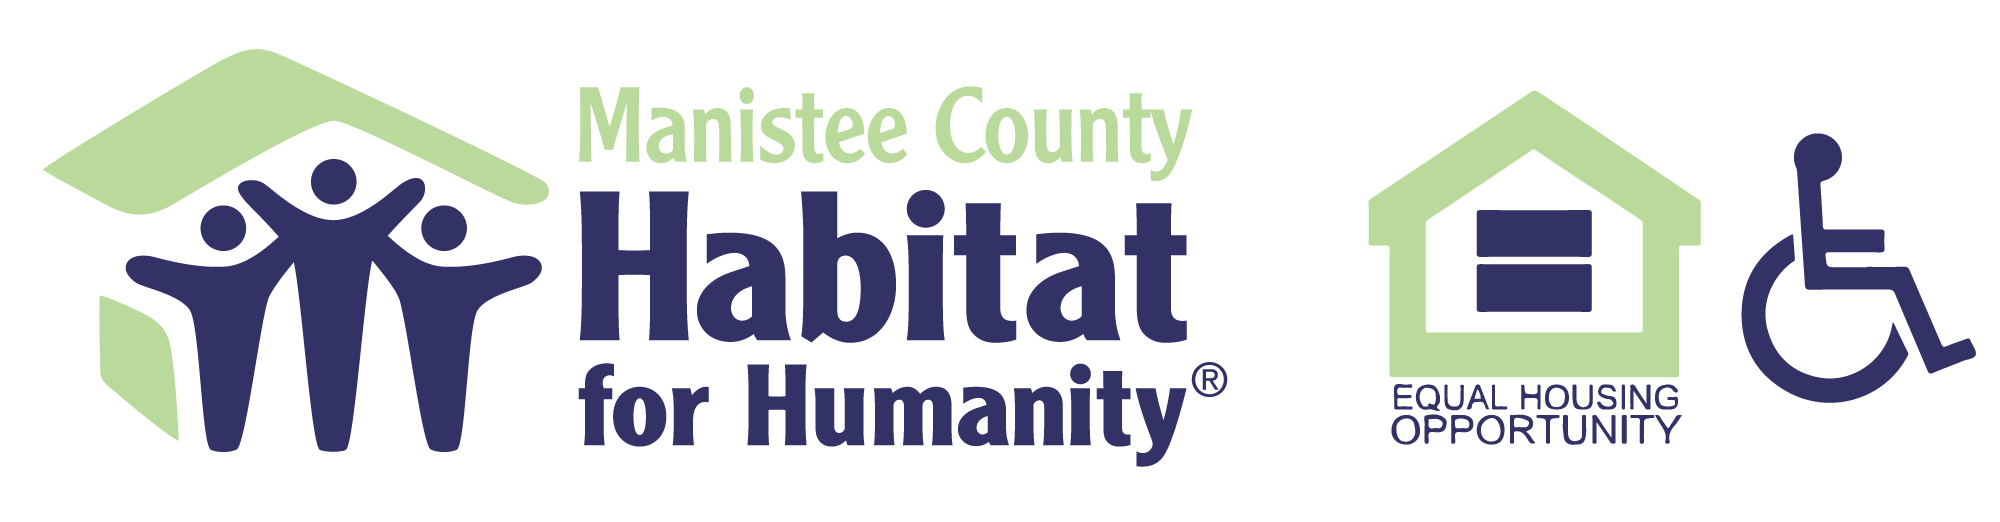 Manistee County Habitat for Humanity